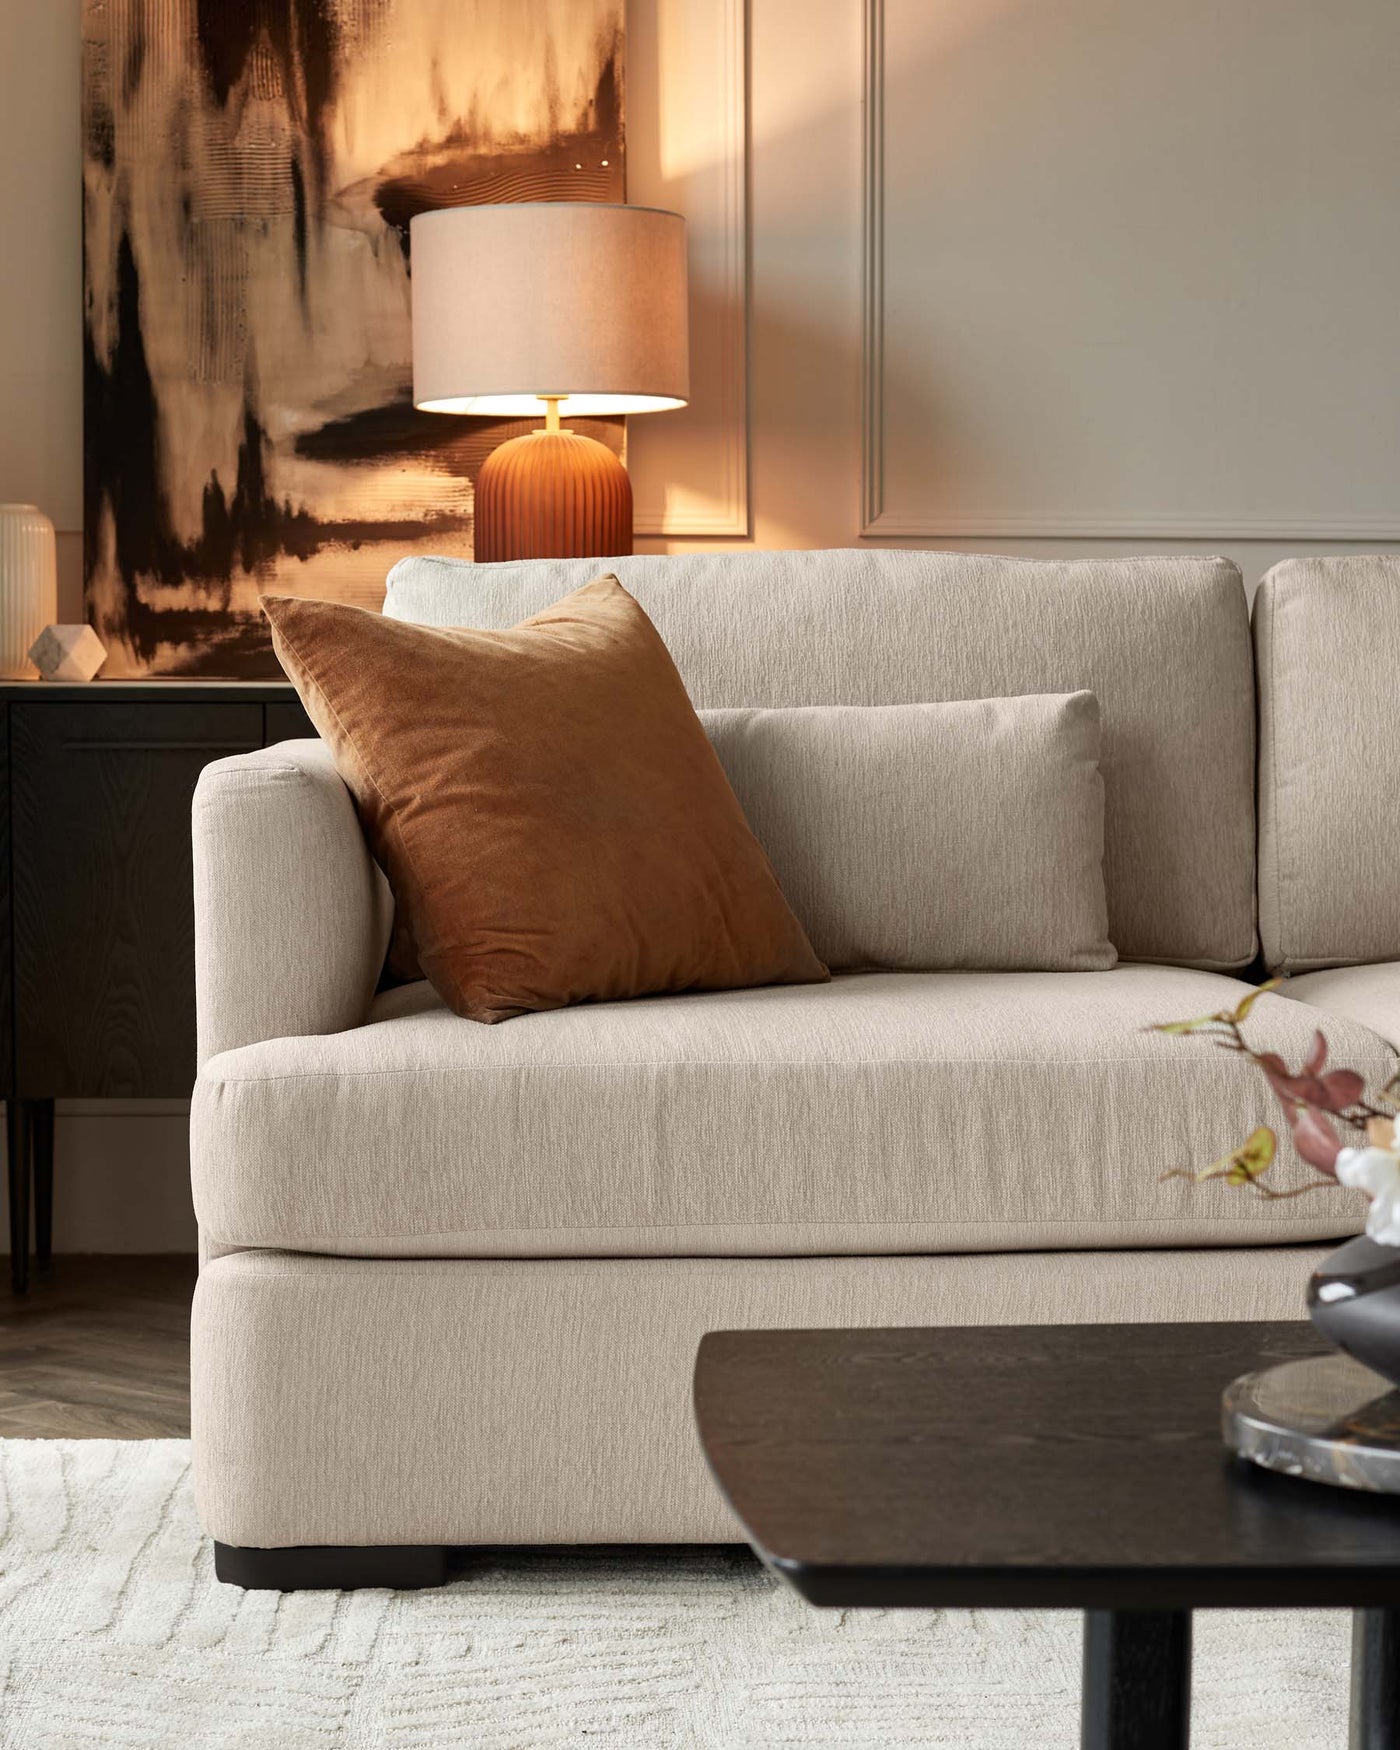 A cosy, modern living room scene featuring a textured beige three-seater sofa adorned with a single brown velvet cushion. In the background, a sleek black side table supports a contemporary lamp with a ribbed terracotta base and beige lampshade. In the foreground, a dark wooden oval-shaped coffee table adds a touch of elegance to the setting, all resting on a textured off-white area rug that complements the neutral palette of the room.